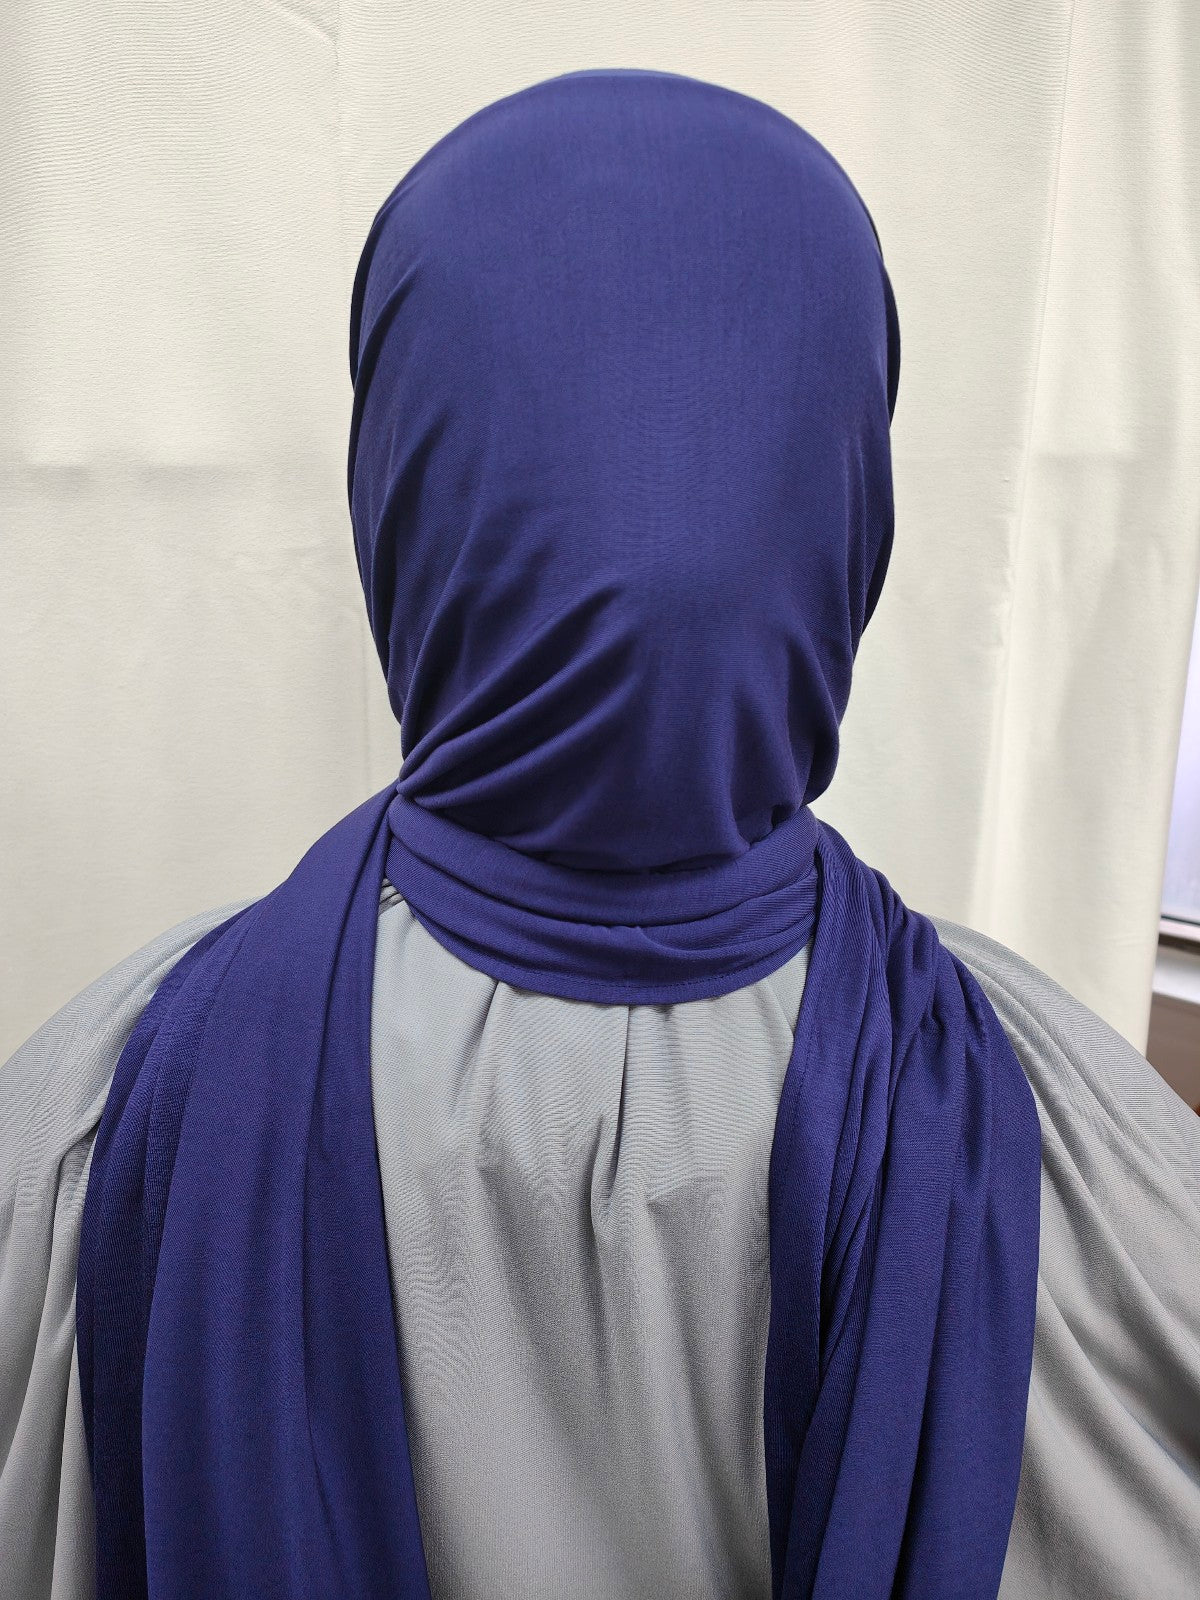 Discover the pinnacle of elegance and comfort with our Royal Blue Pure Bamboo Hijab, exclusively offered by Hikmah Boutique. This hijab seamlessly merges style, breathability, and eco-friendliness, making it the ideal choice for any occasion. Stay cool and confident with Hikmah Boutique's Premium Quality Hijabs.